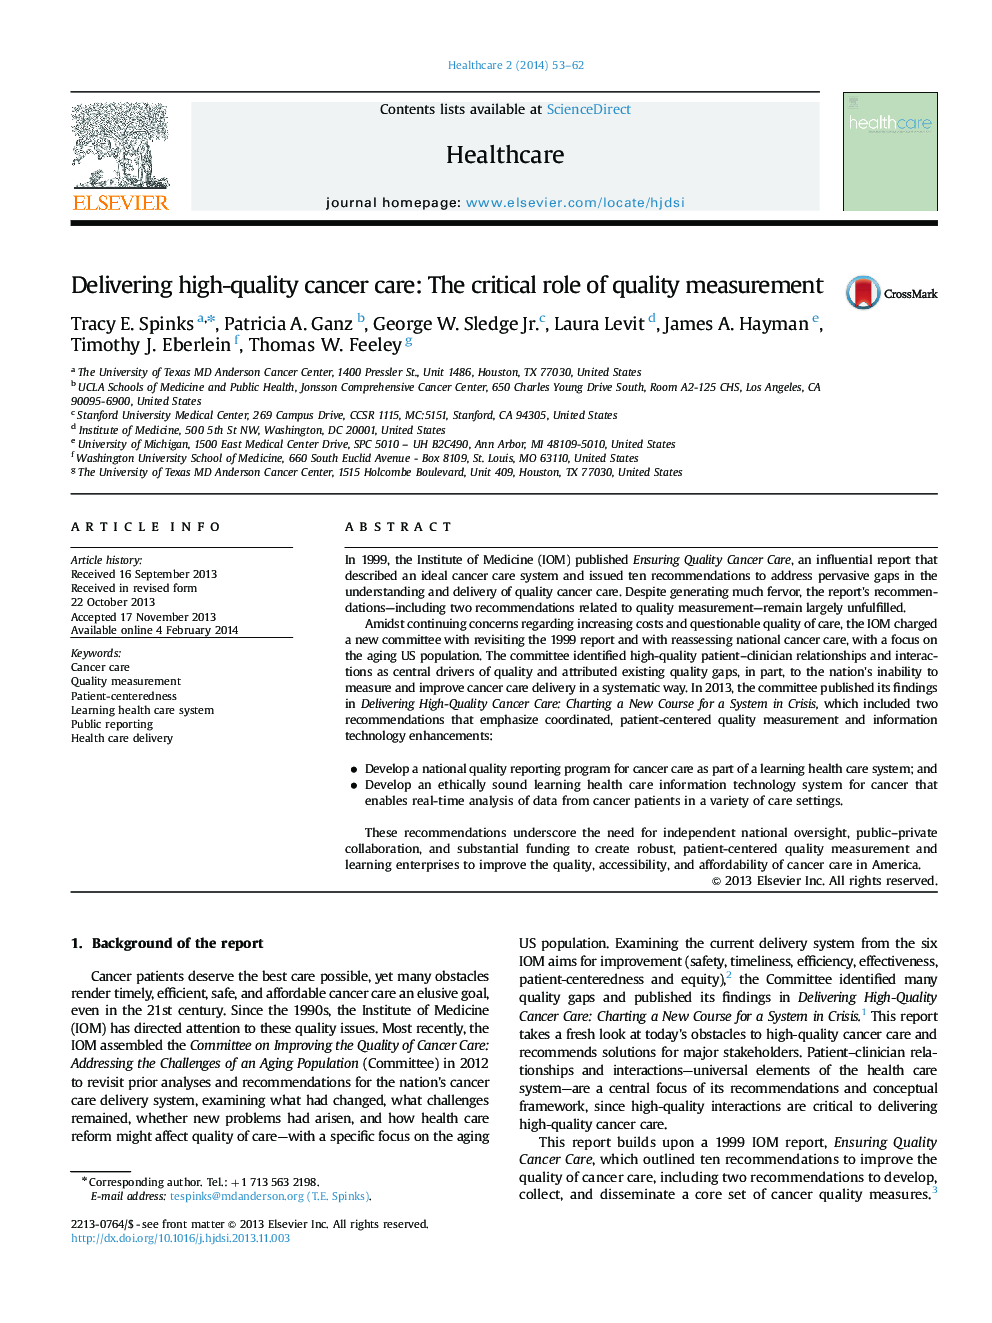 Delivering high-quality cancer care: The critical role of quality measurement